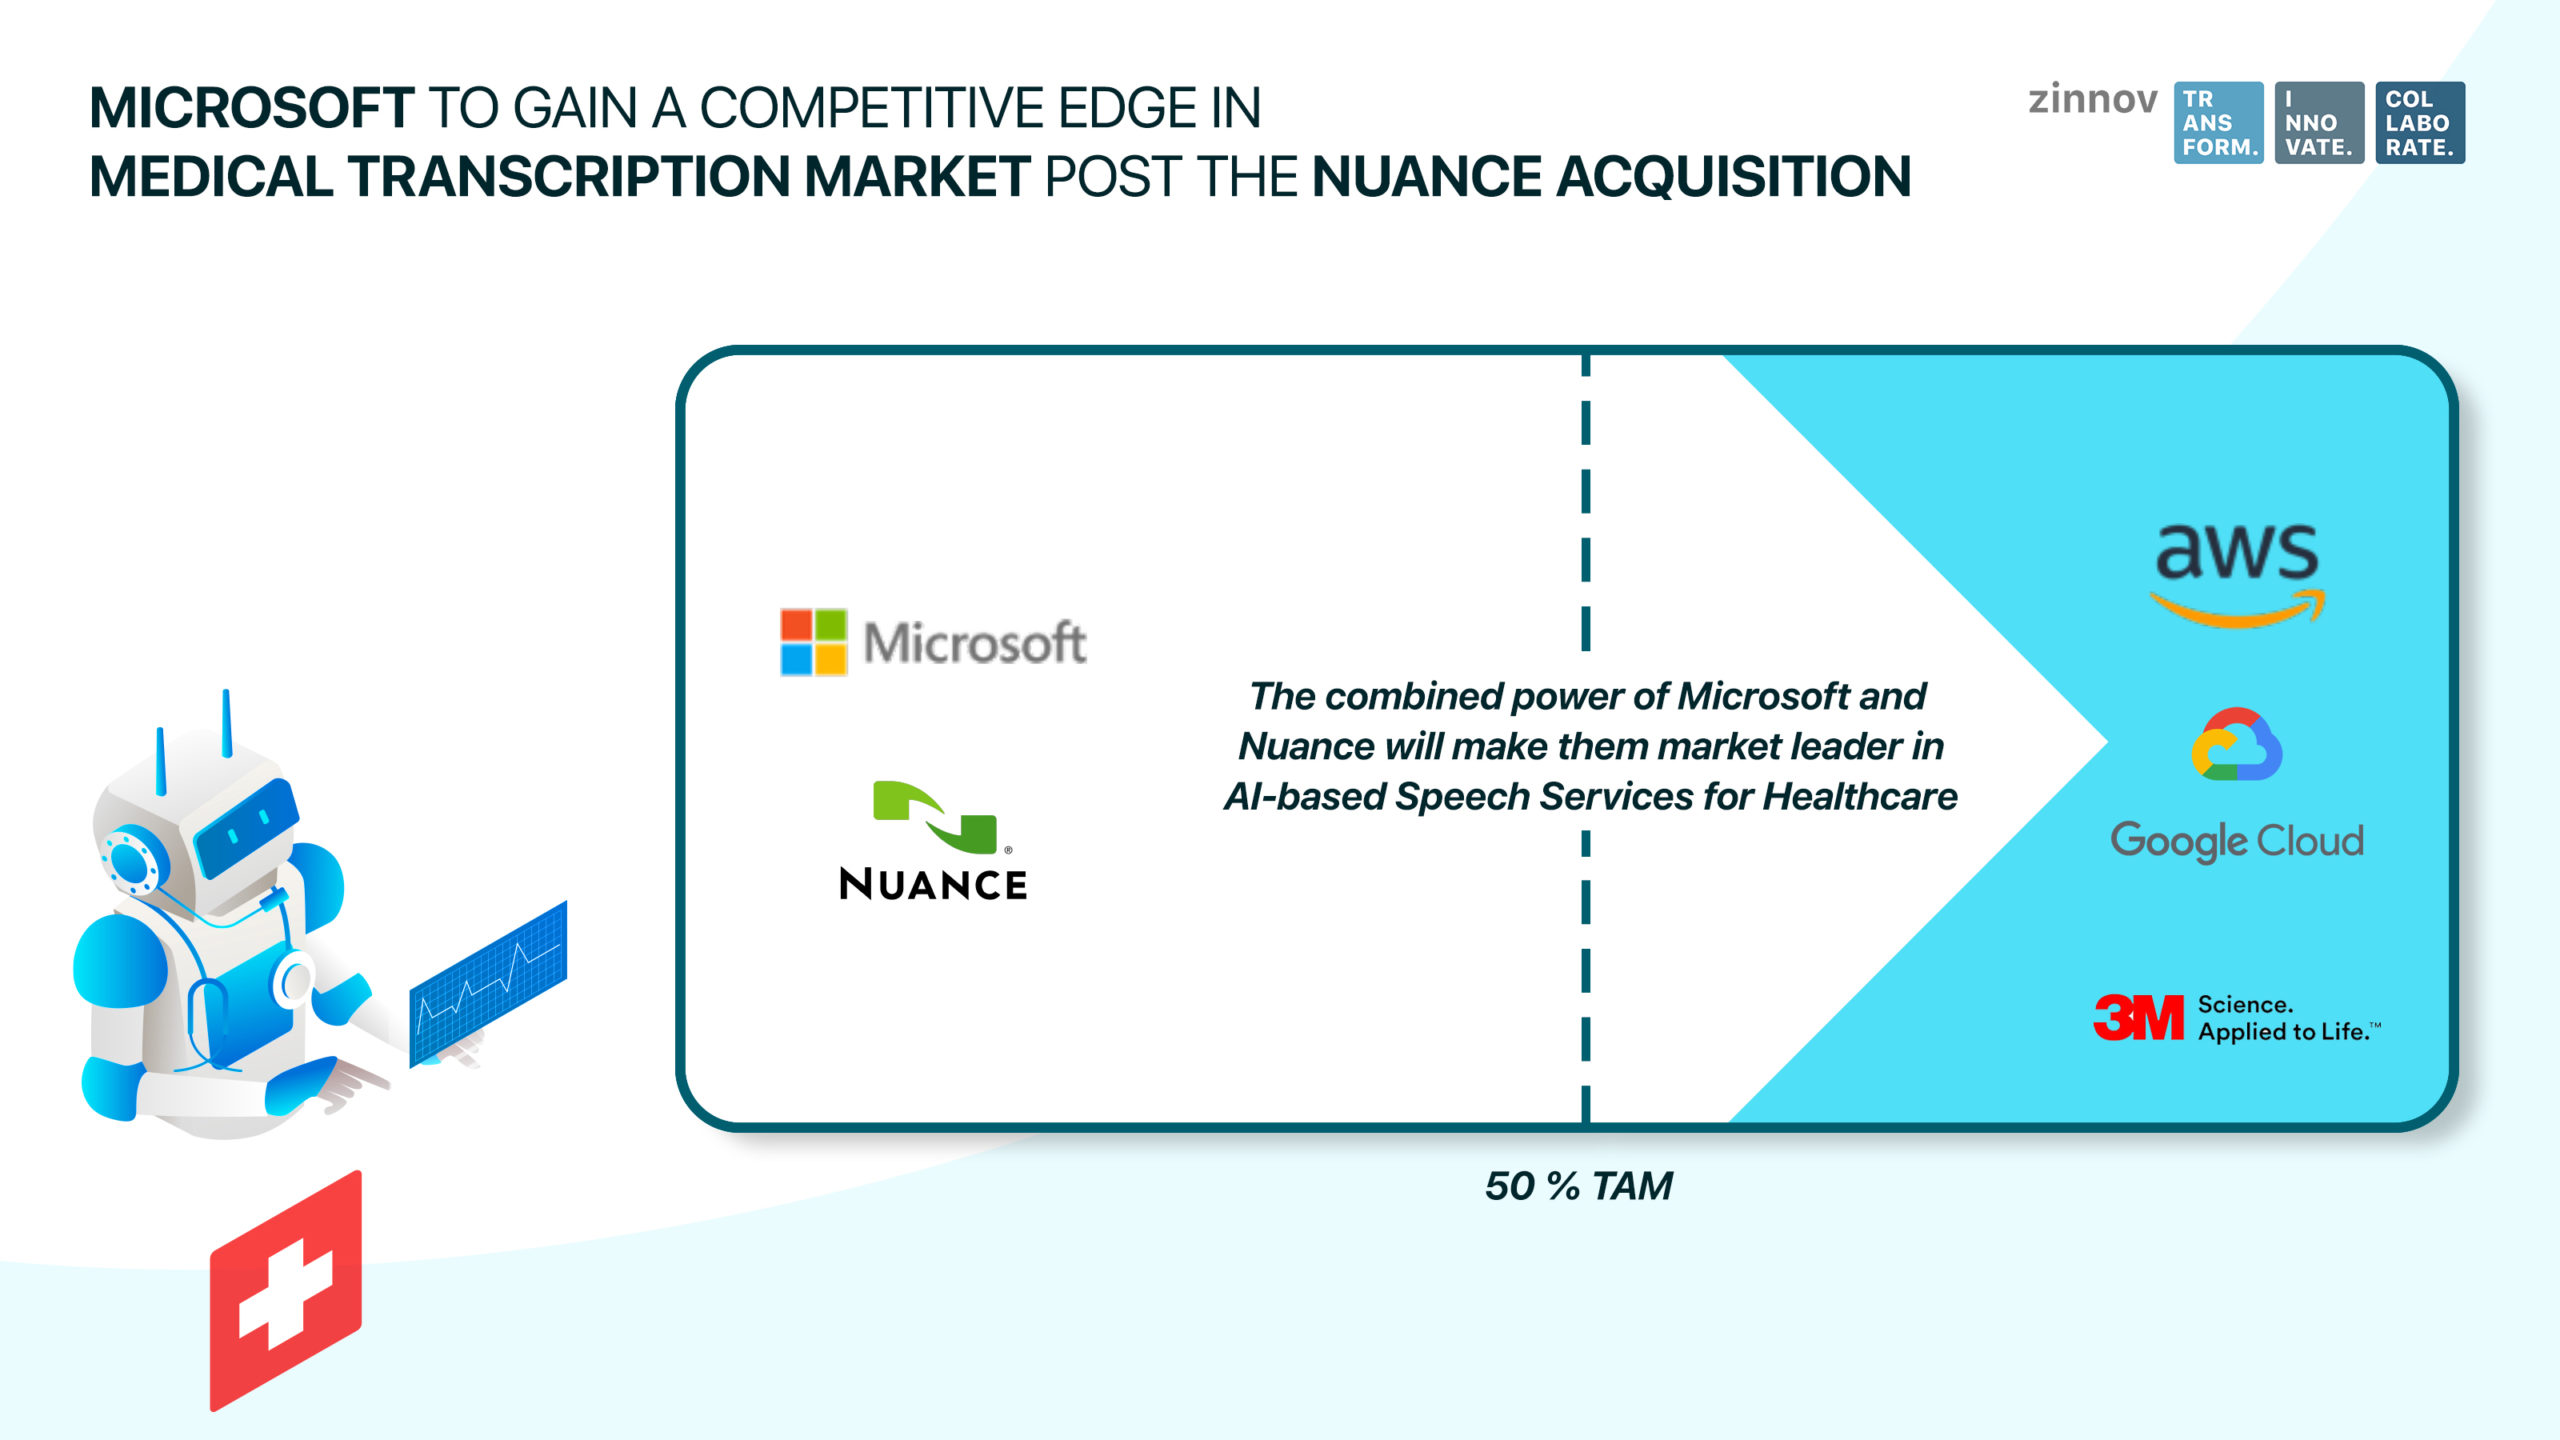 Microsoft to gain a competitive edge in medical transcription market post the Nuance acquisition